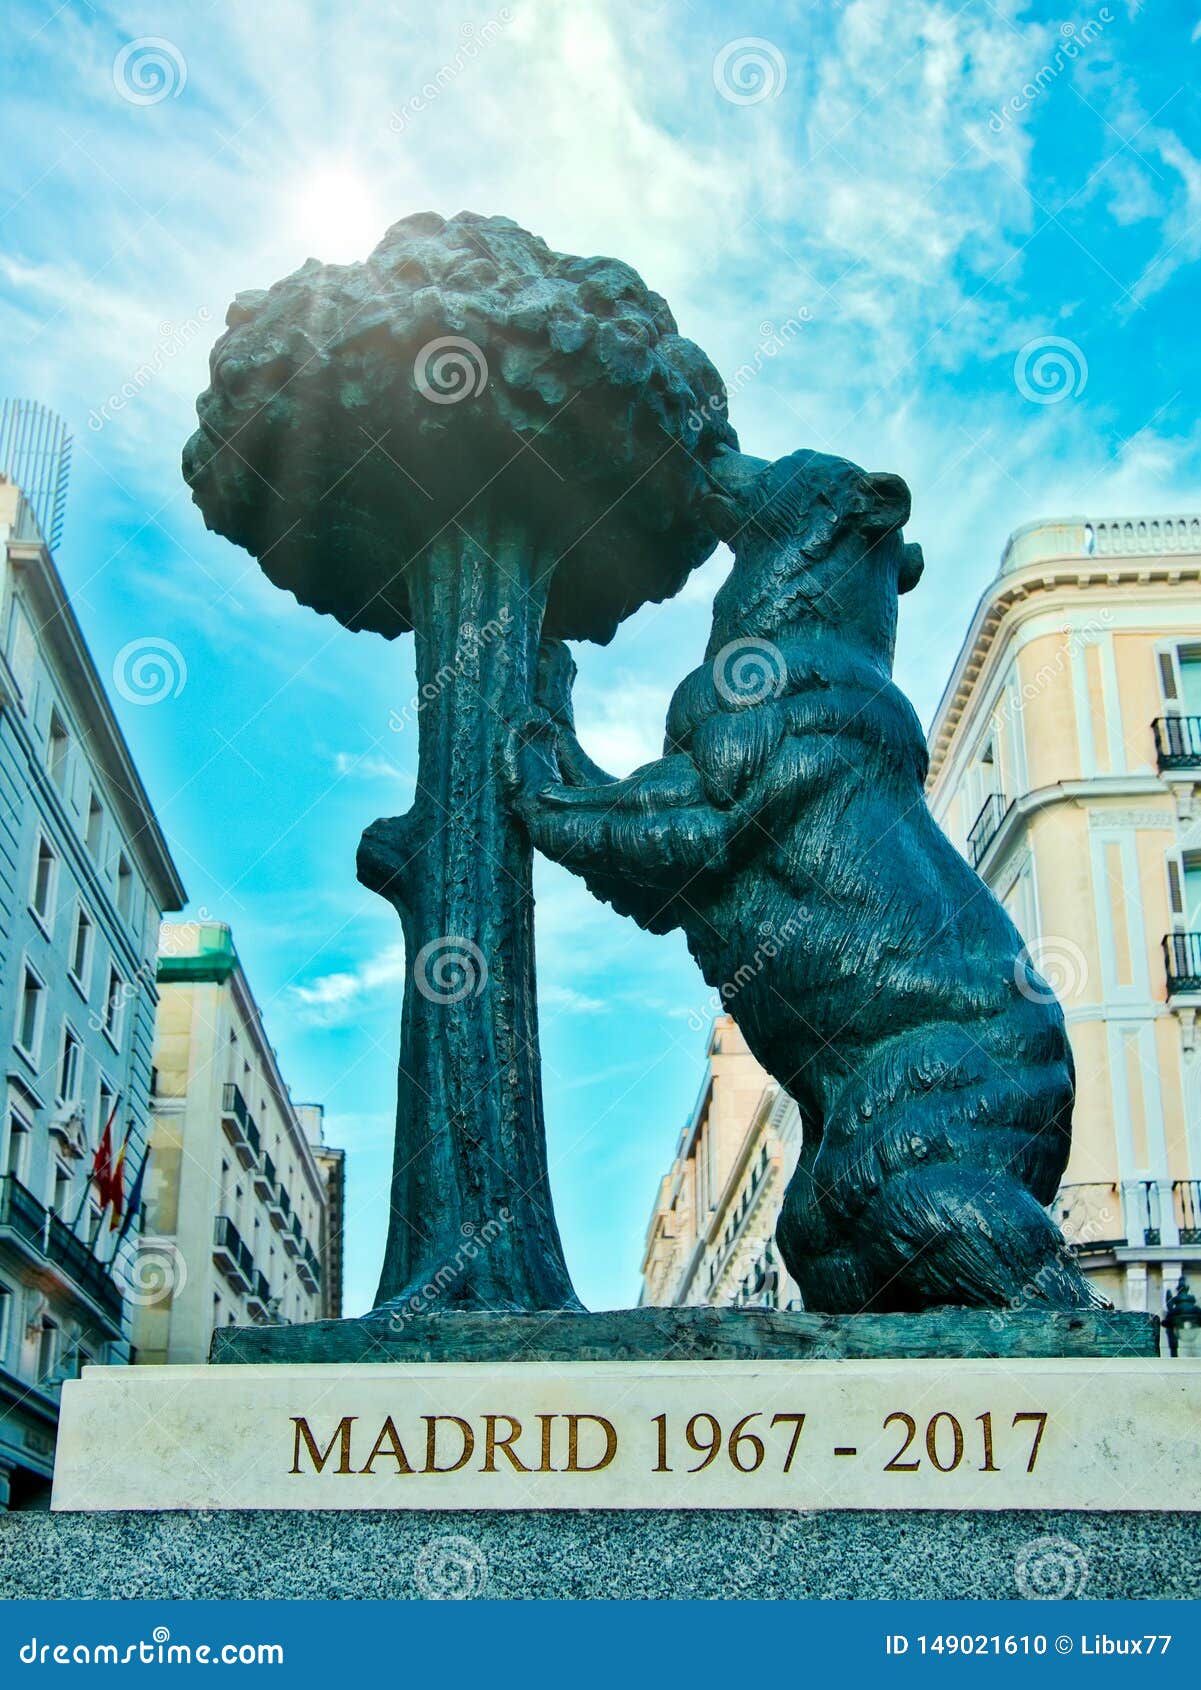 the bear  of madrid. statue of the bear and the strawberry tree oso y el madrono in puerta del sol square in madrid spain